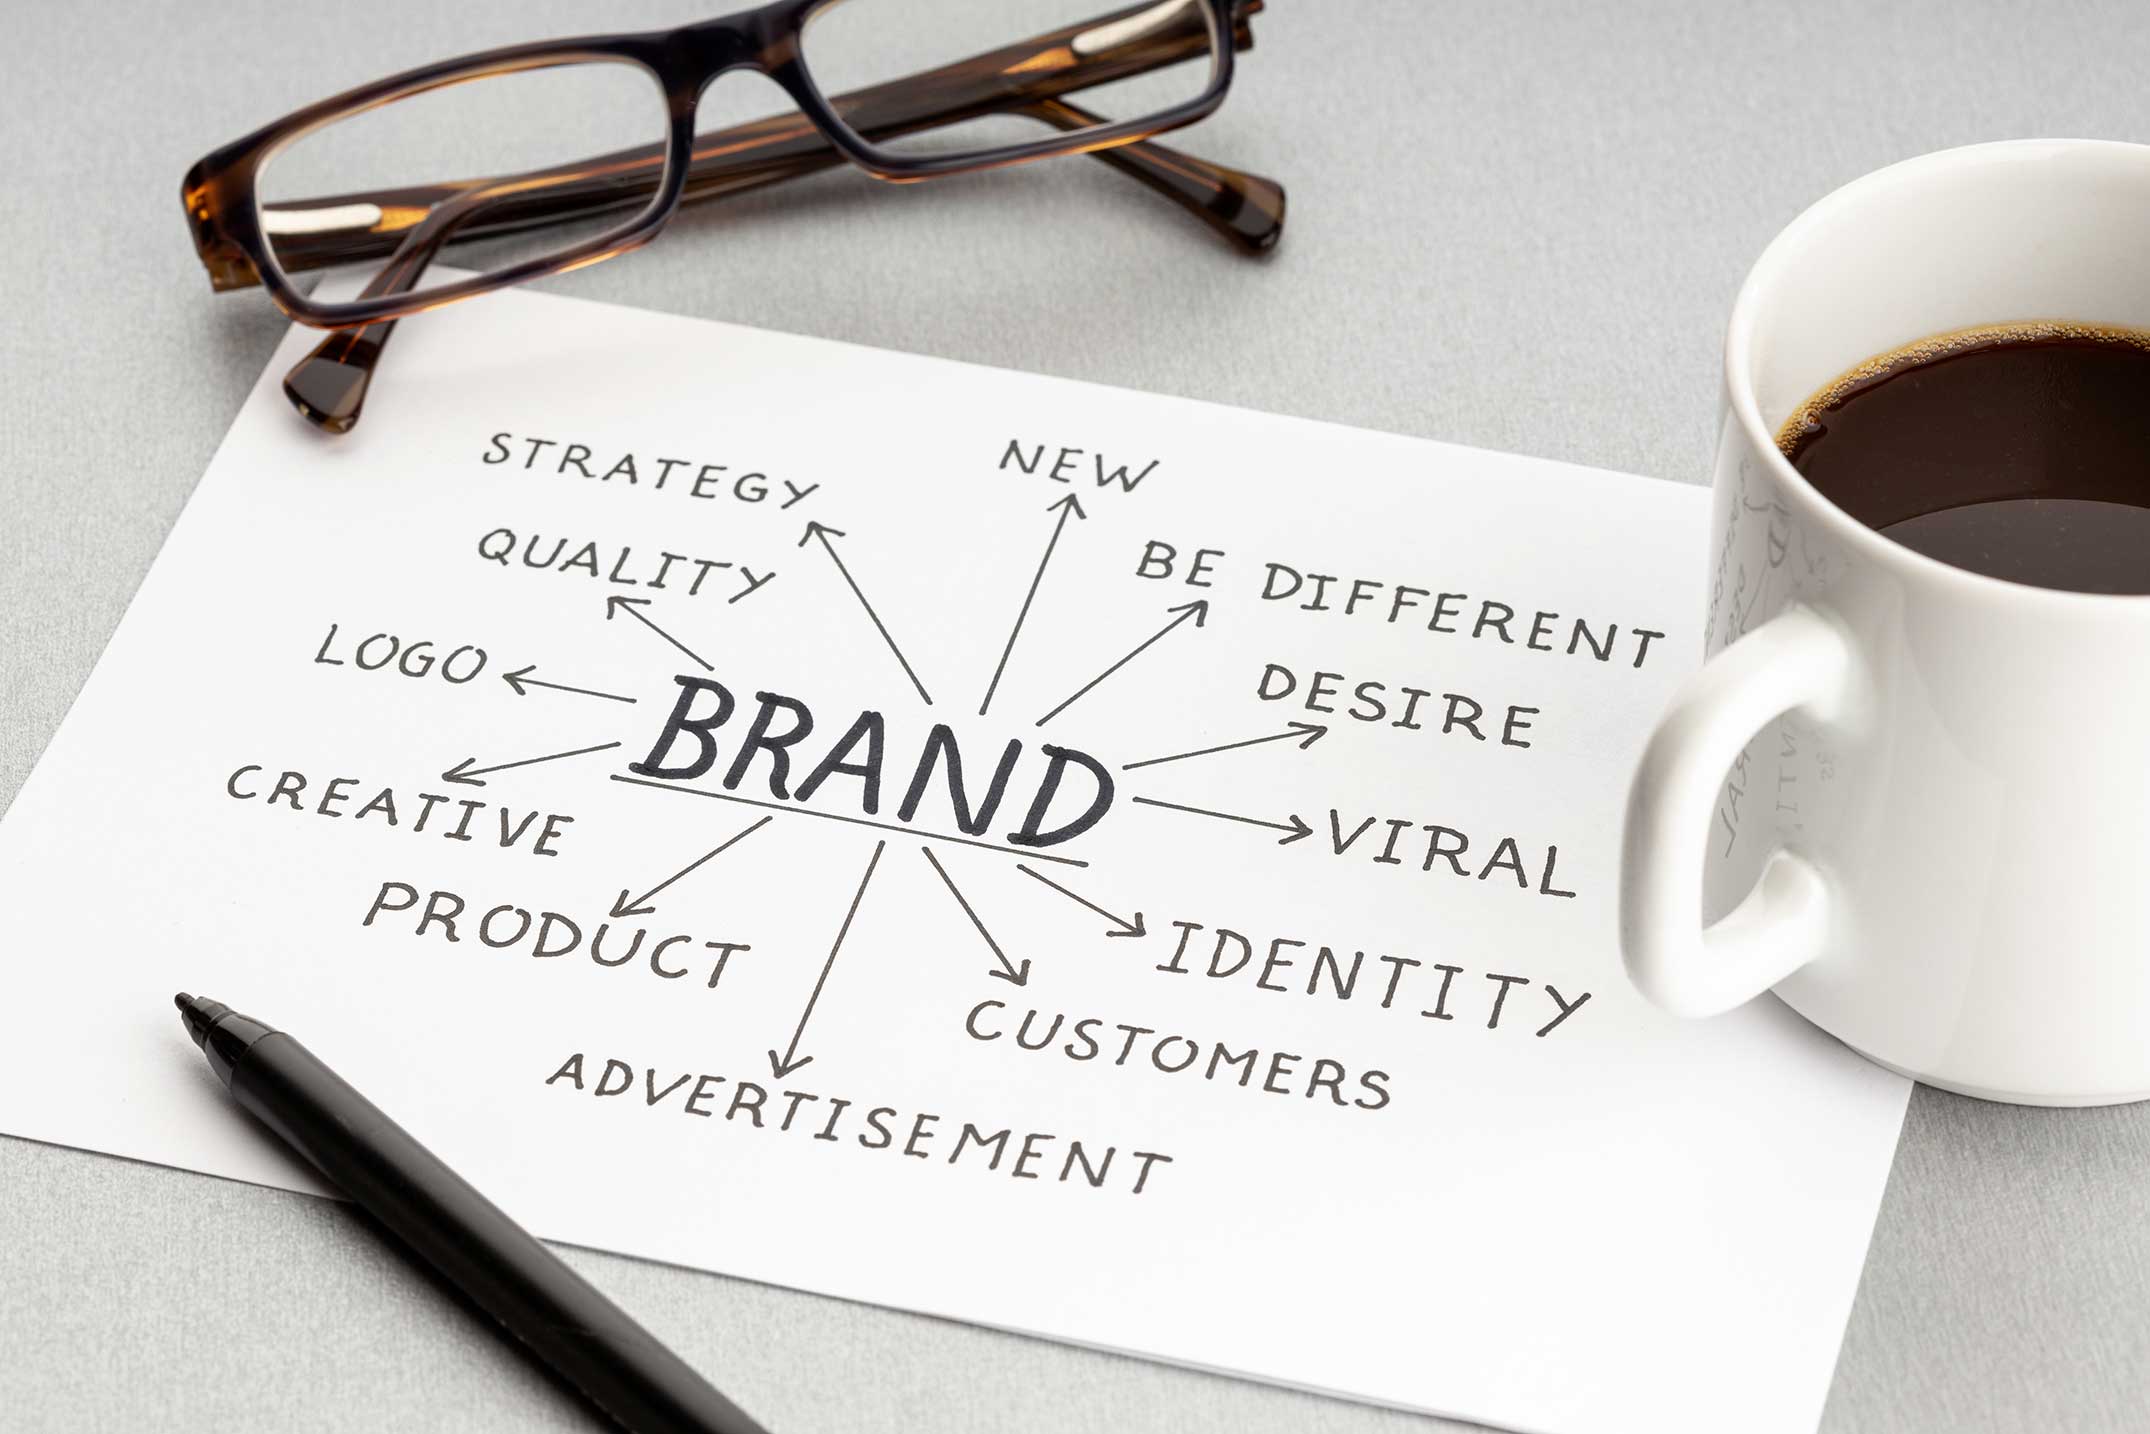 paper with brand written on it surrounded by brand elements with a pair of glasses and a coffee cup next to it on a desk